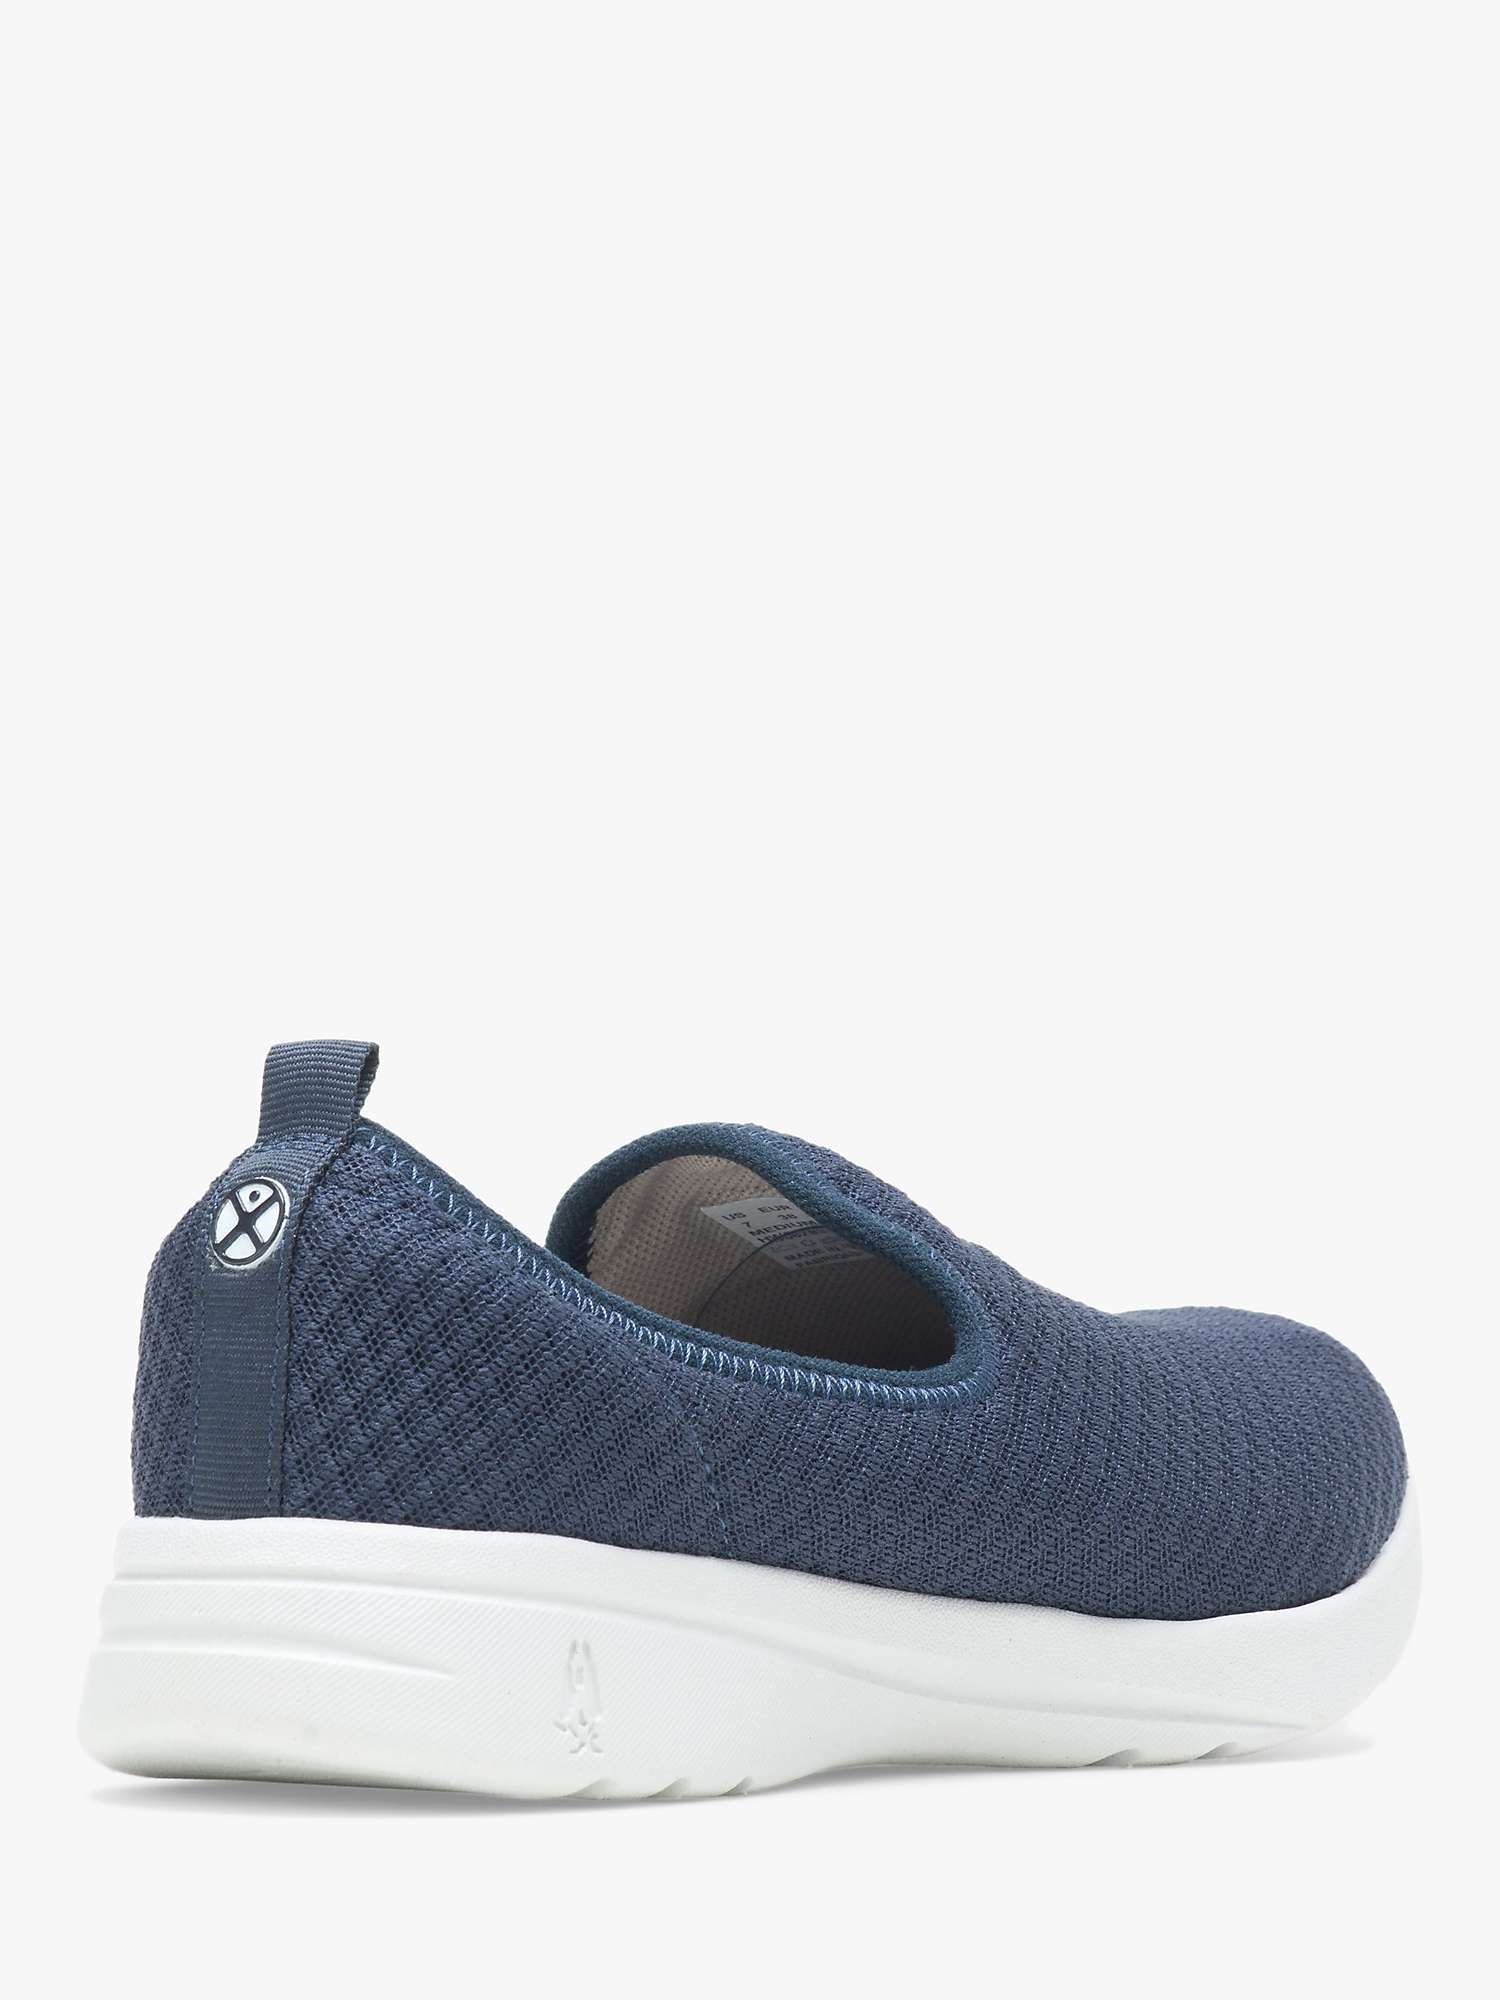 Buy Hush Puppies Good Slip-On Trainers, Navy Online at johnlewis.com